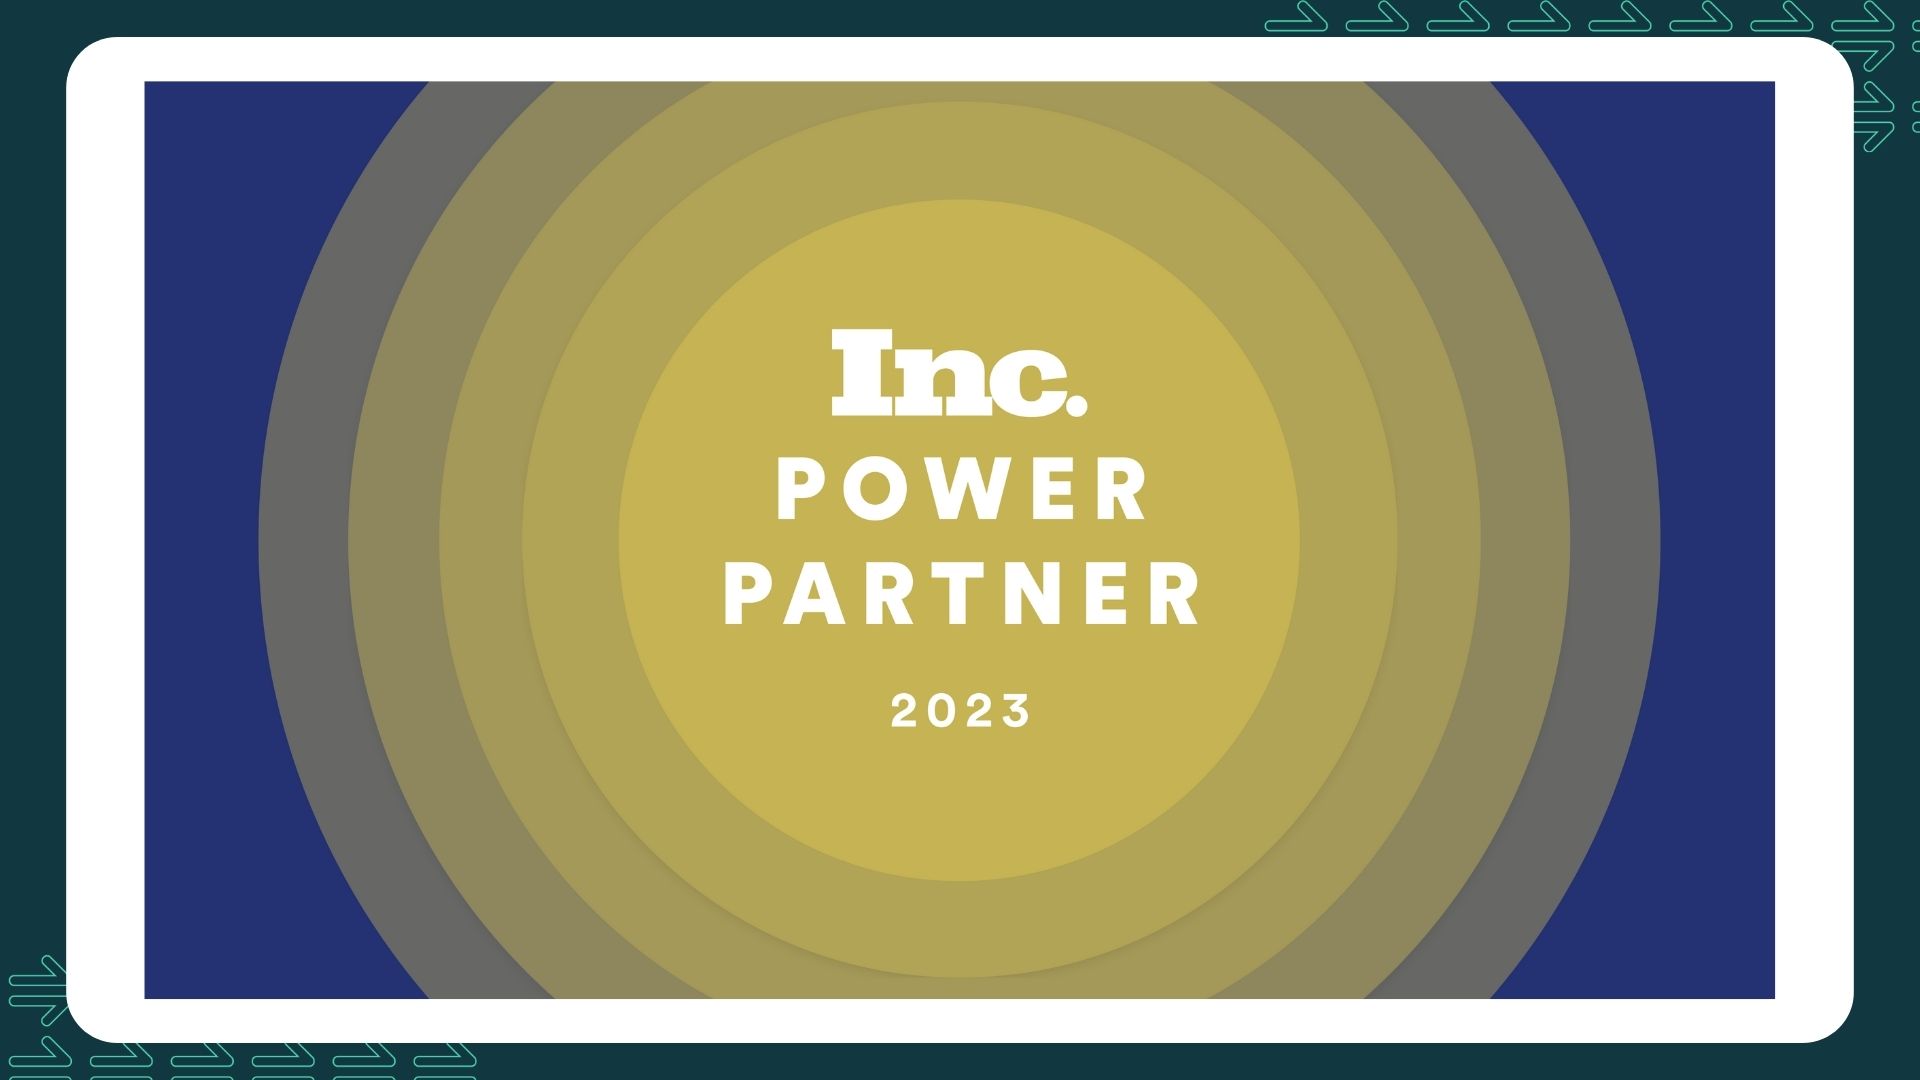 Forward Financing Named to Inc.’s Second Annual Power Partner Awards Image